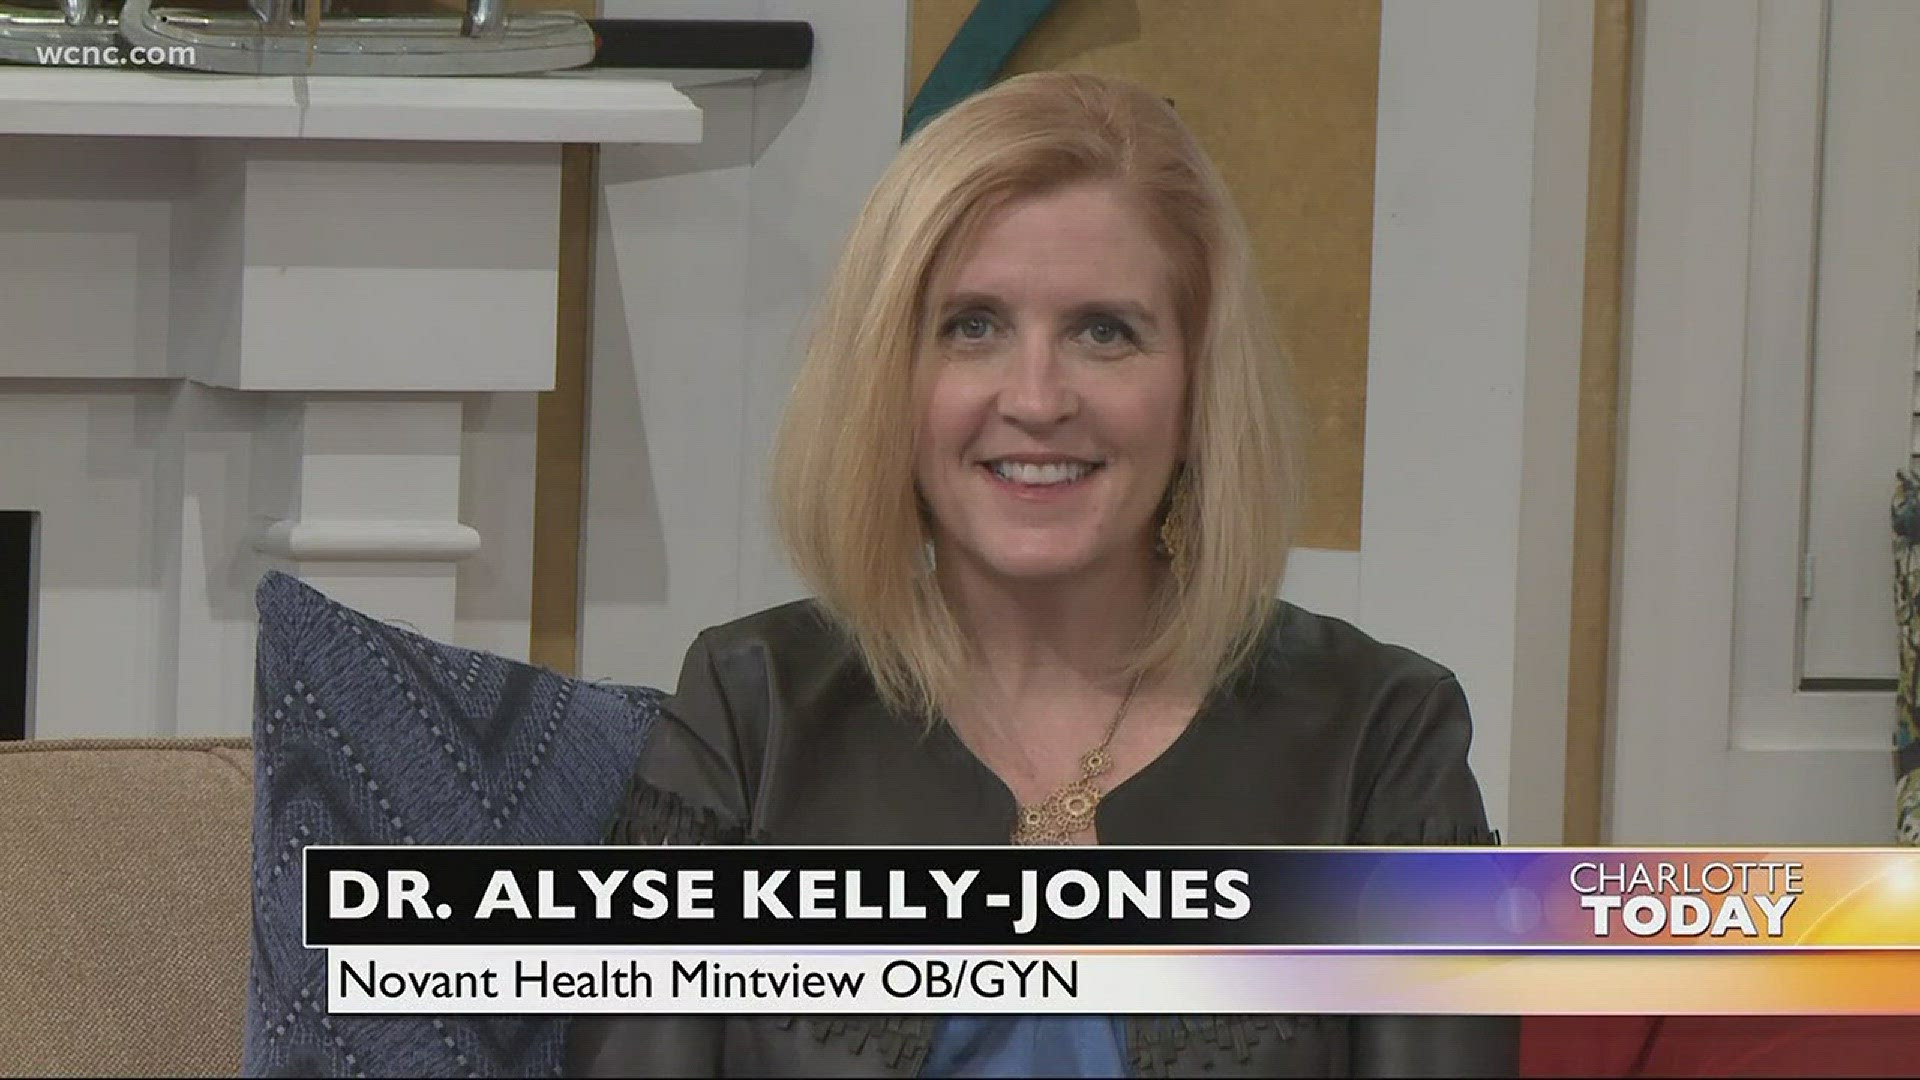 Dr. Alyse Kelly-Jones  shares signs and symptoms women need to be aware of.